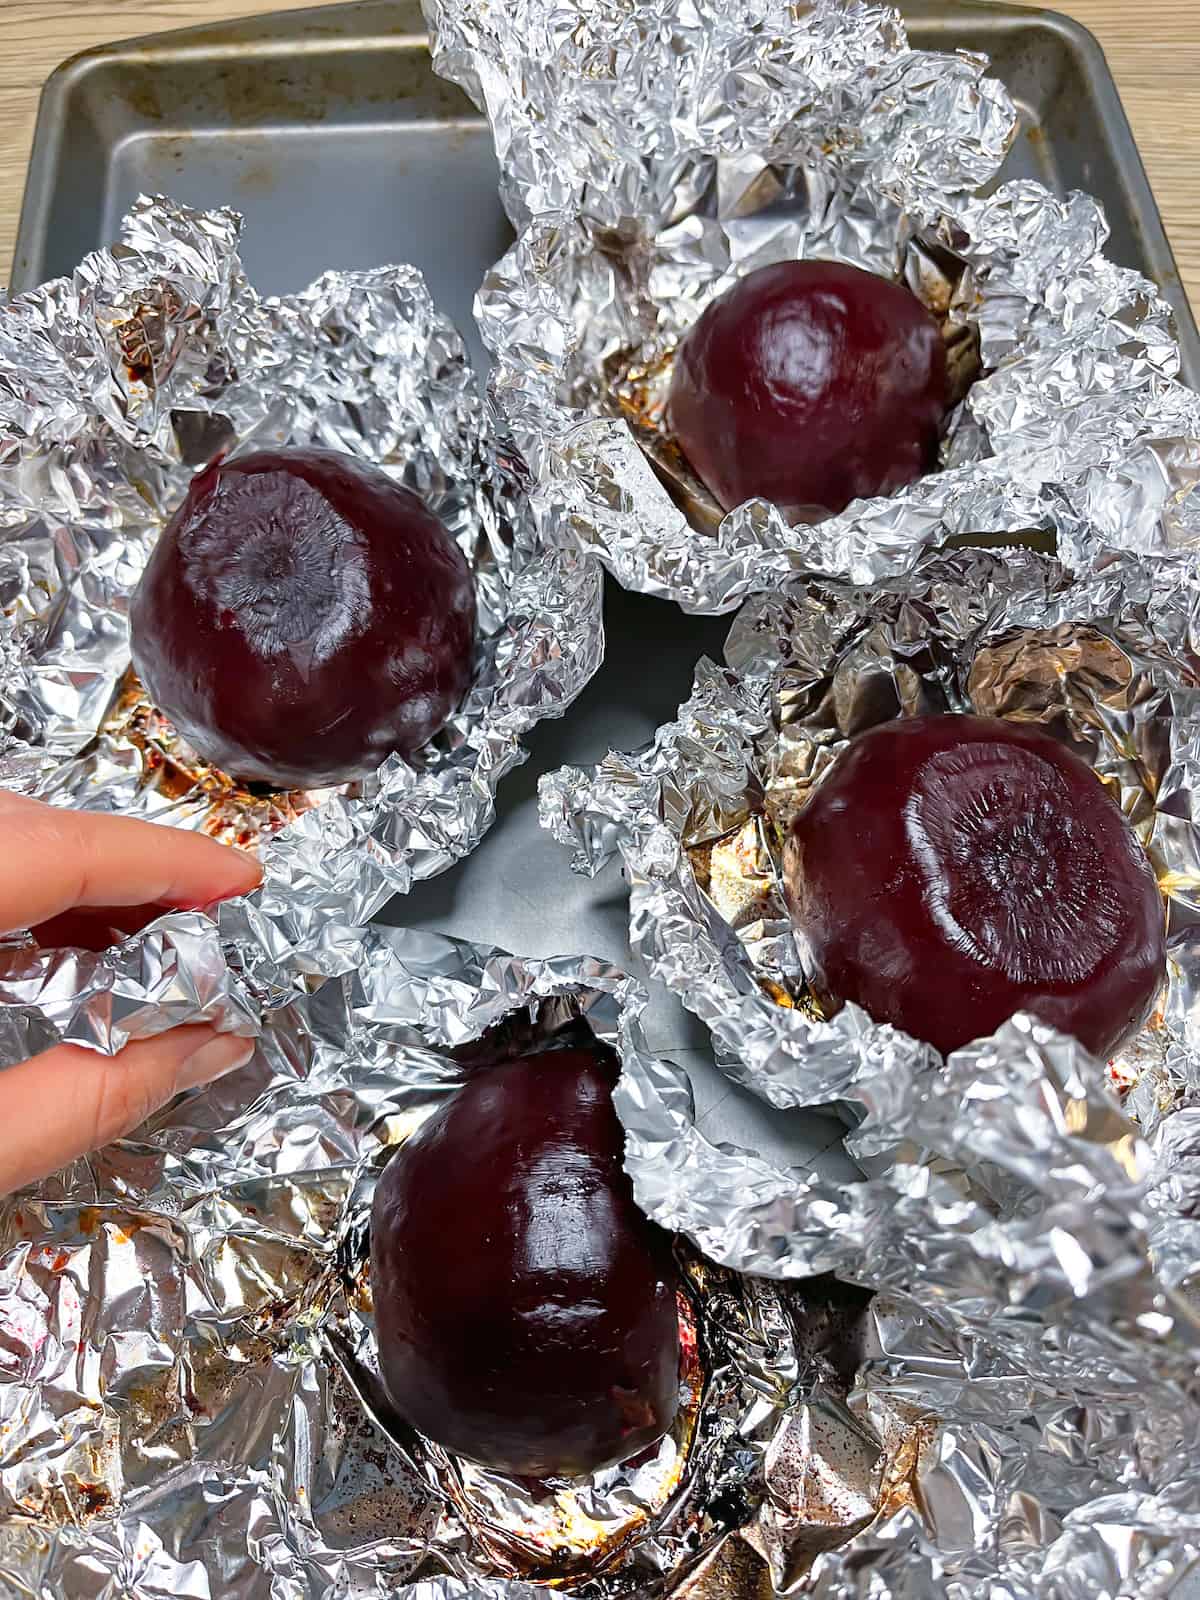 Beets fresh out of the oven still in foil with a hand opening the foil on one of them